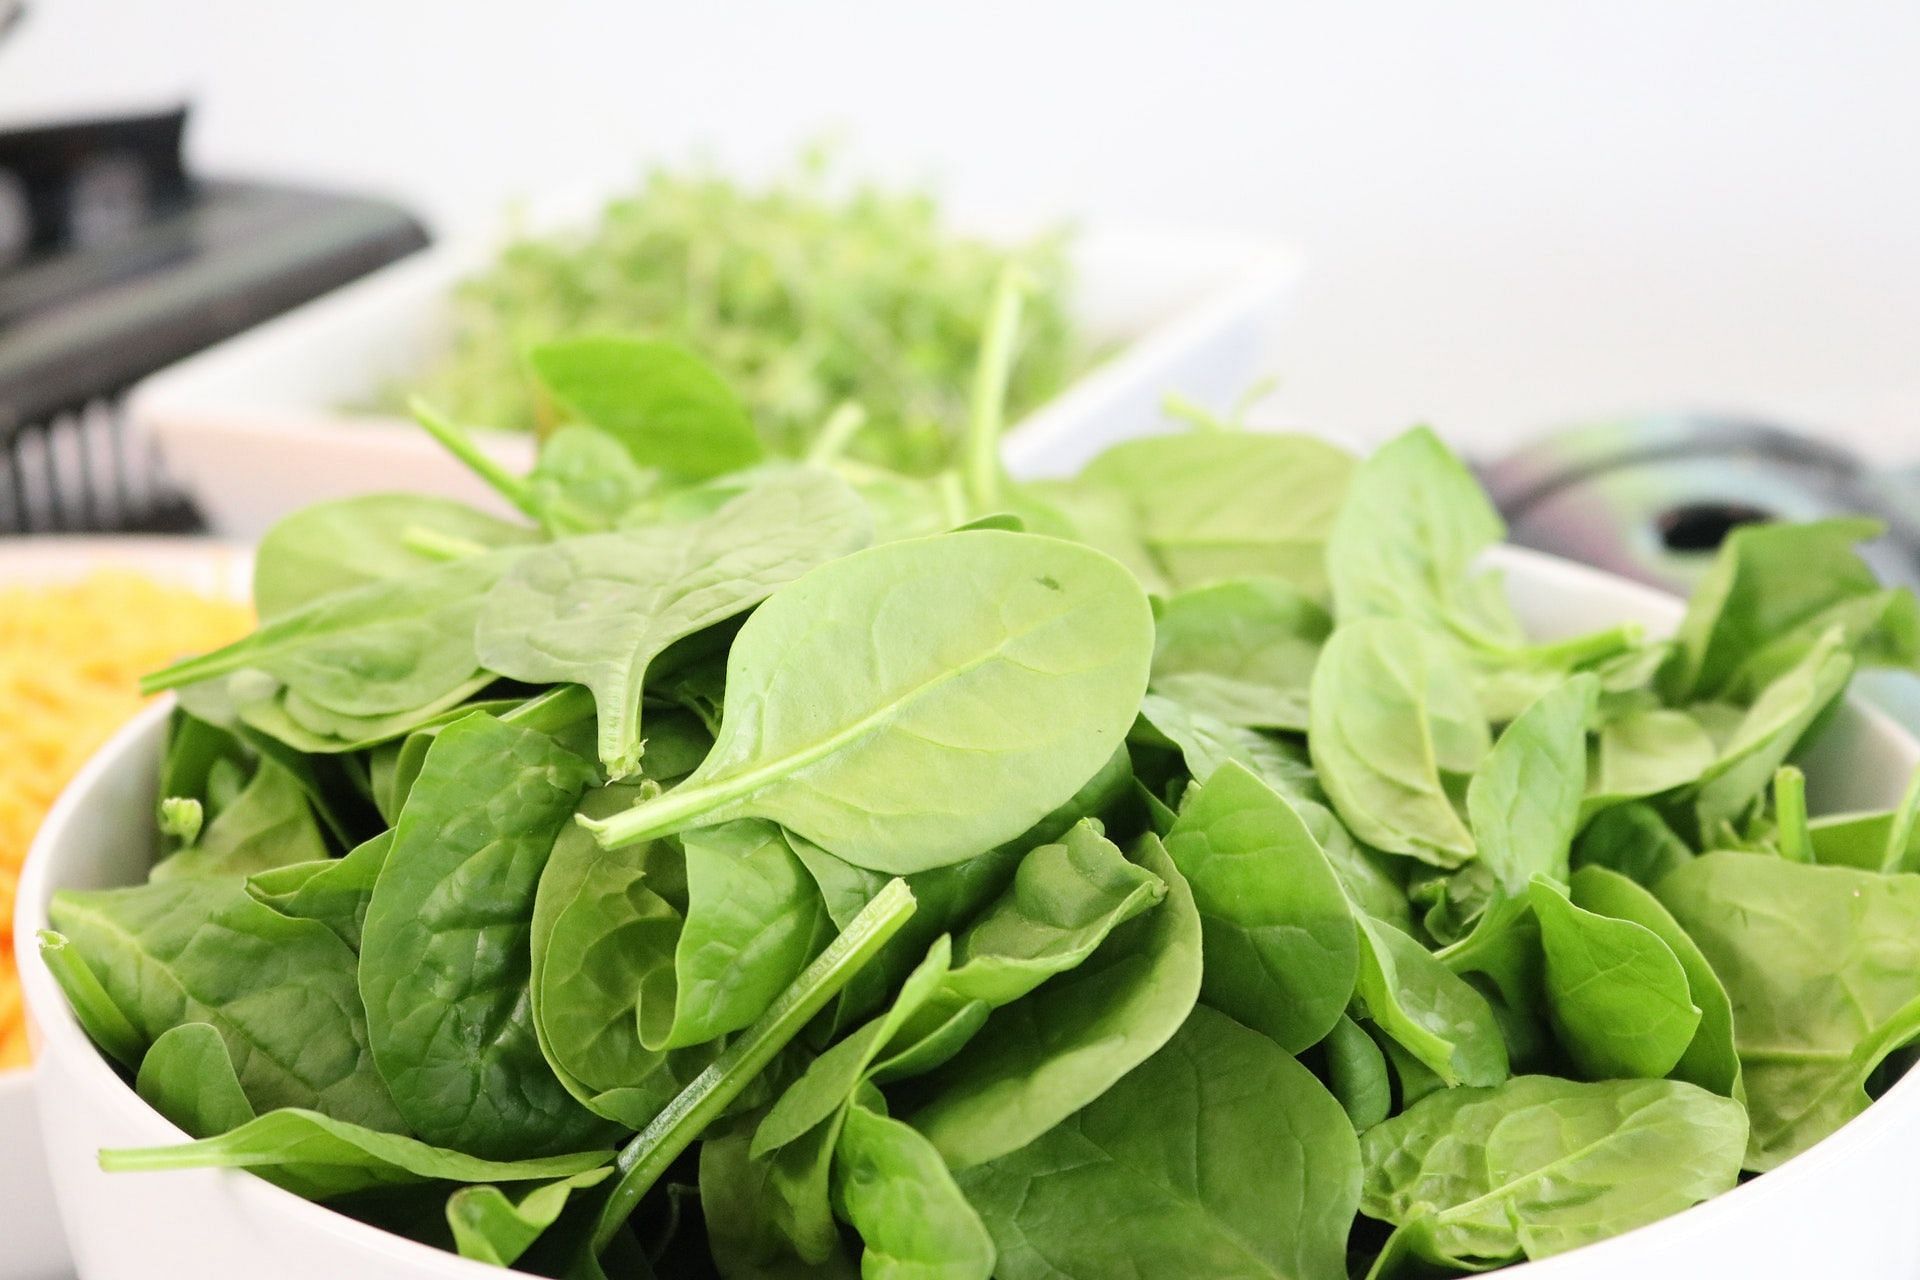 Spinach is considered a superfood and offers several health benefits. (Photo by Jacqueline Howell via pexels)